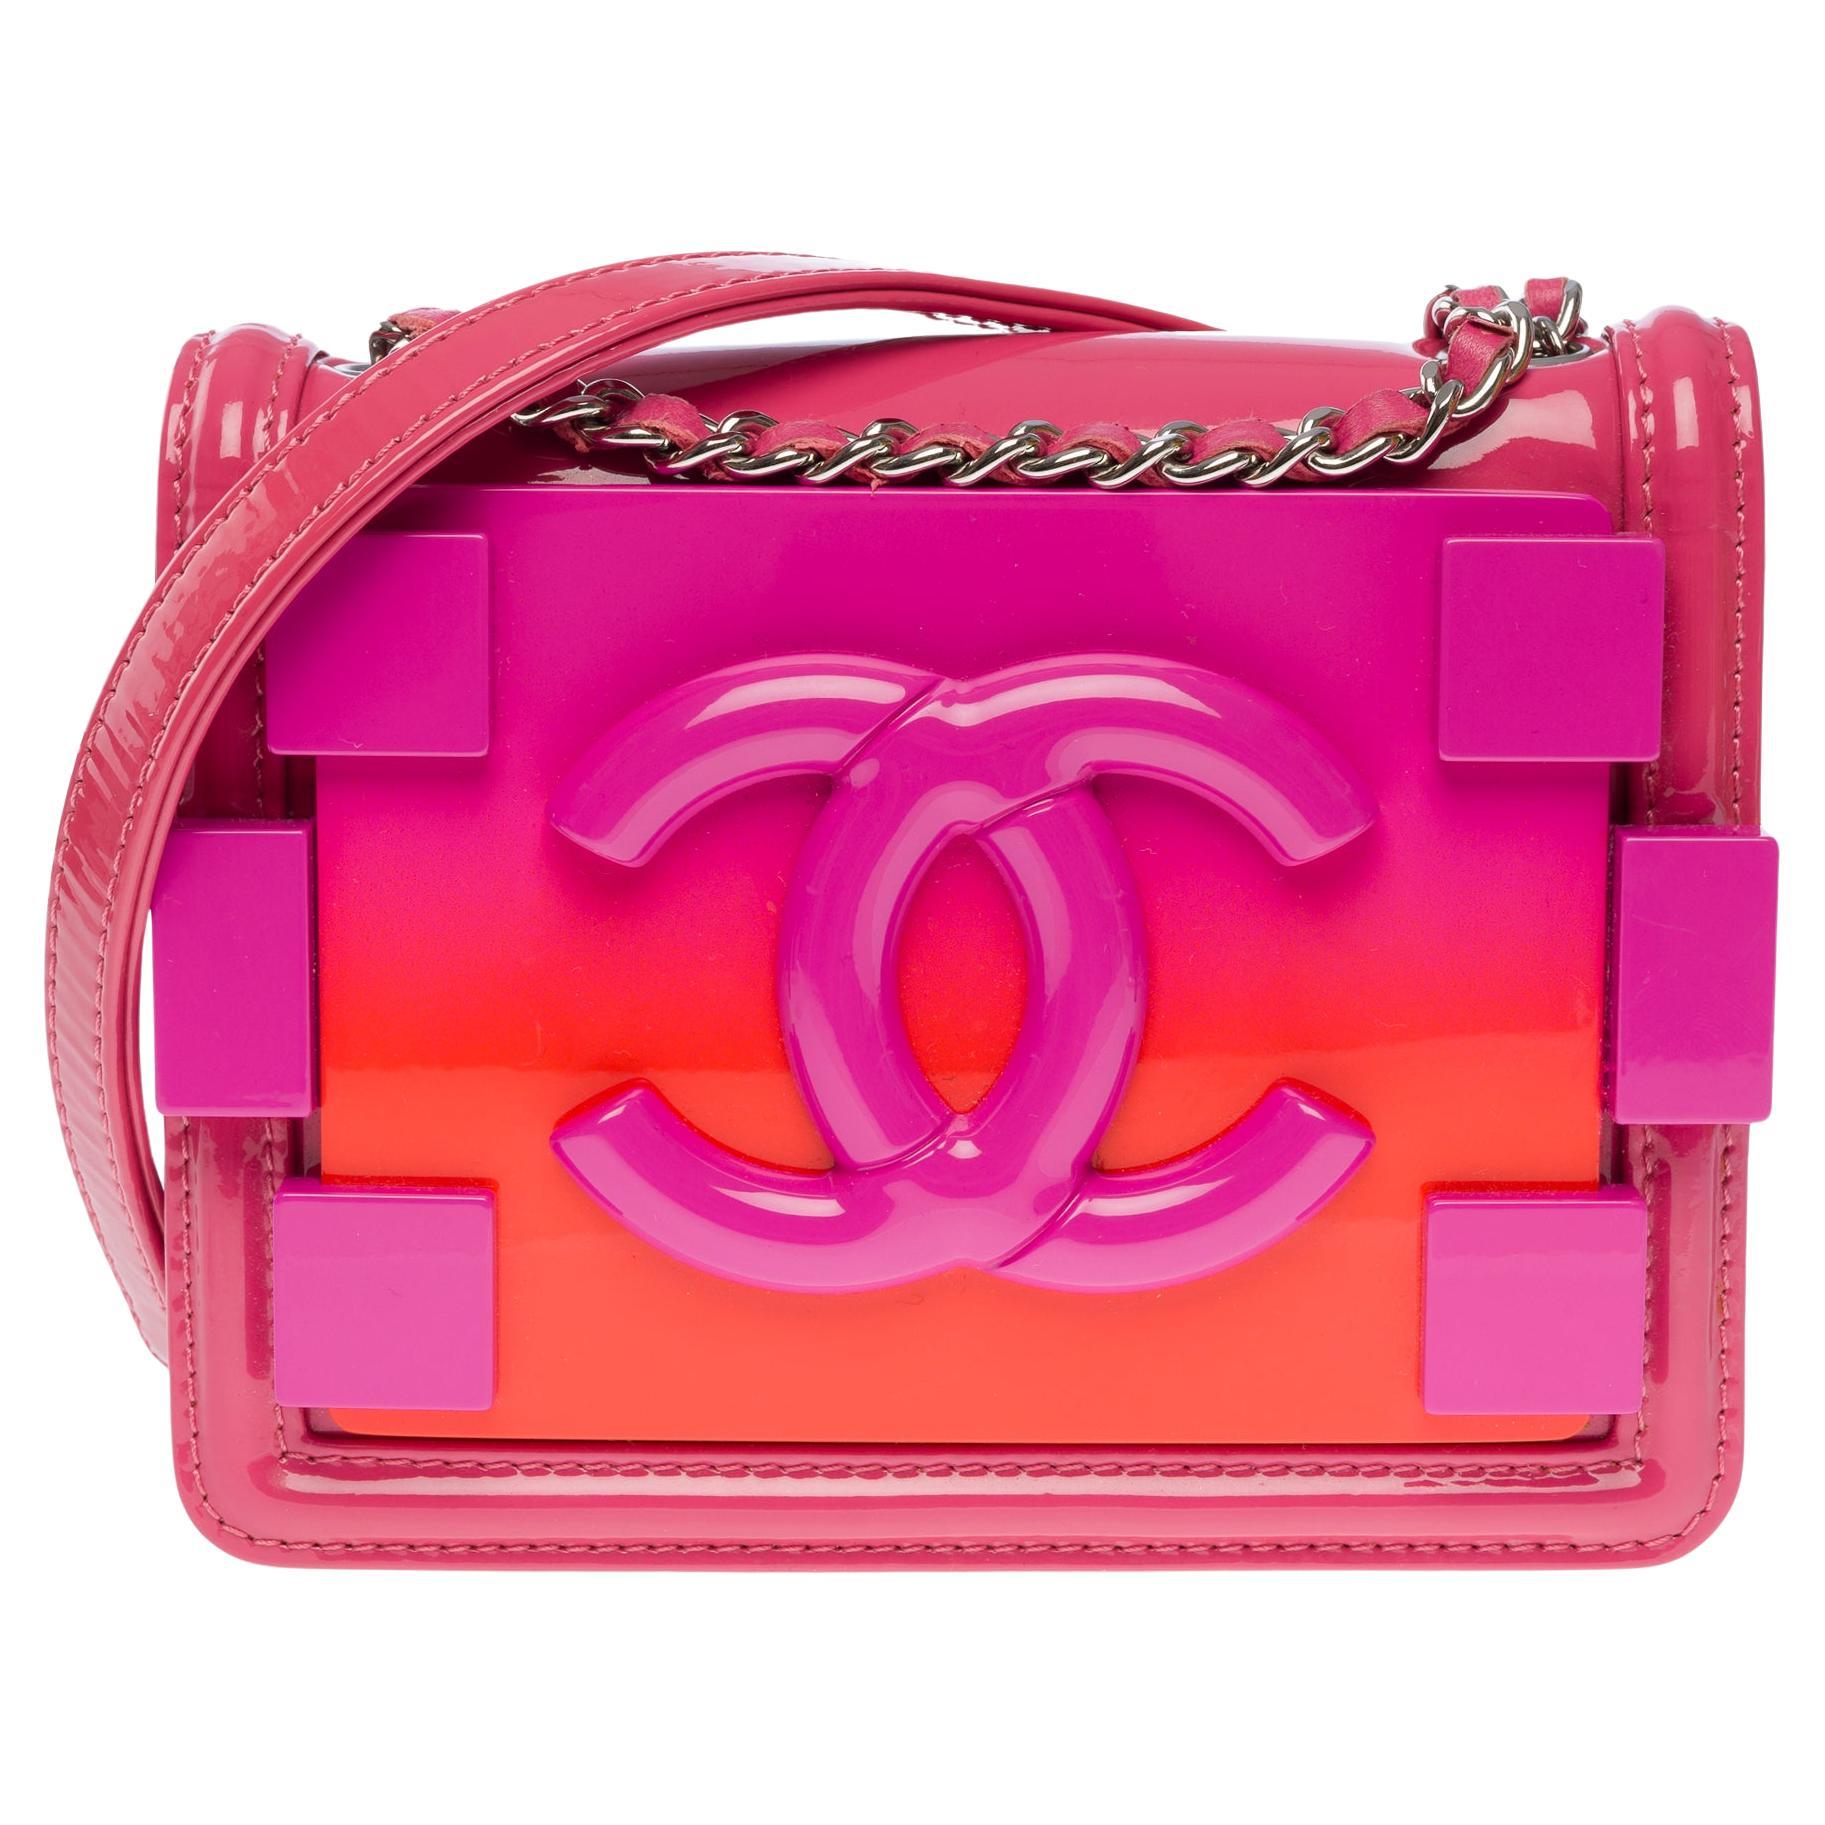 Limited edition Chanel Mini shoulder flap bag lego in Pink and